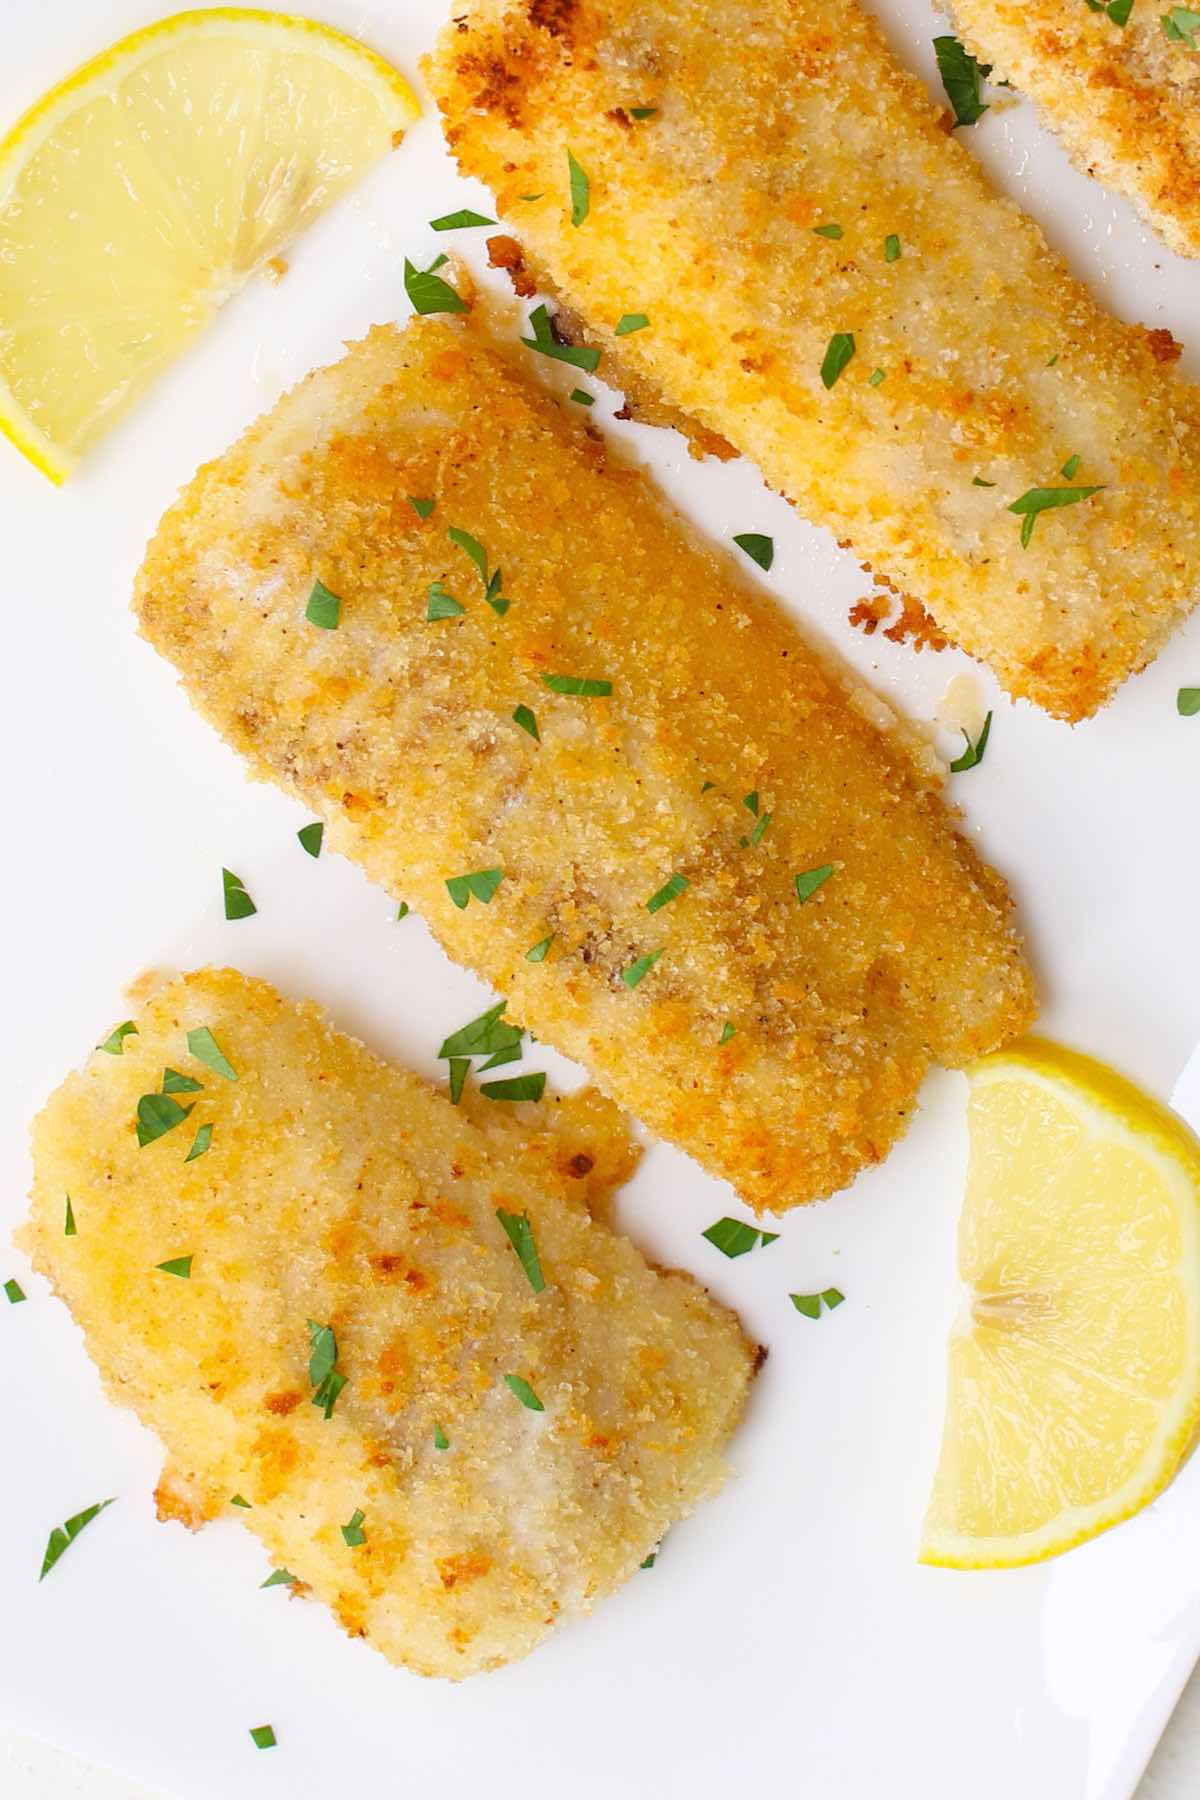 Breaded fish fillets that have turned a beautiful golden brown in the oven, garnished with minced parsley and lemon wedges